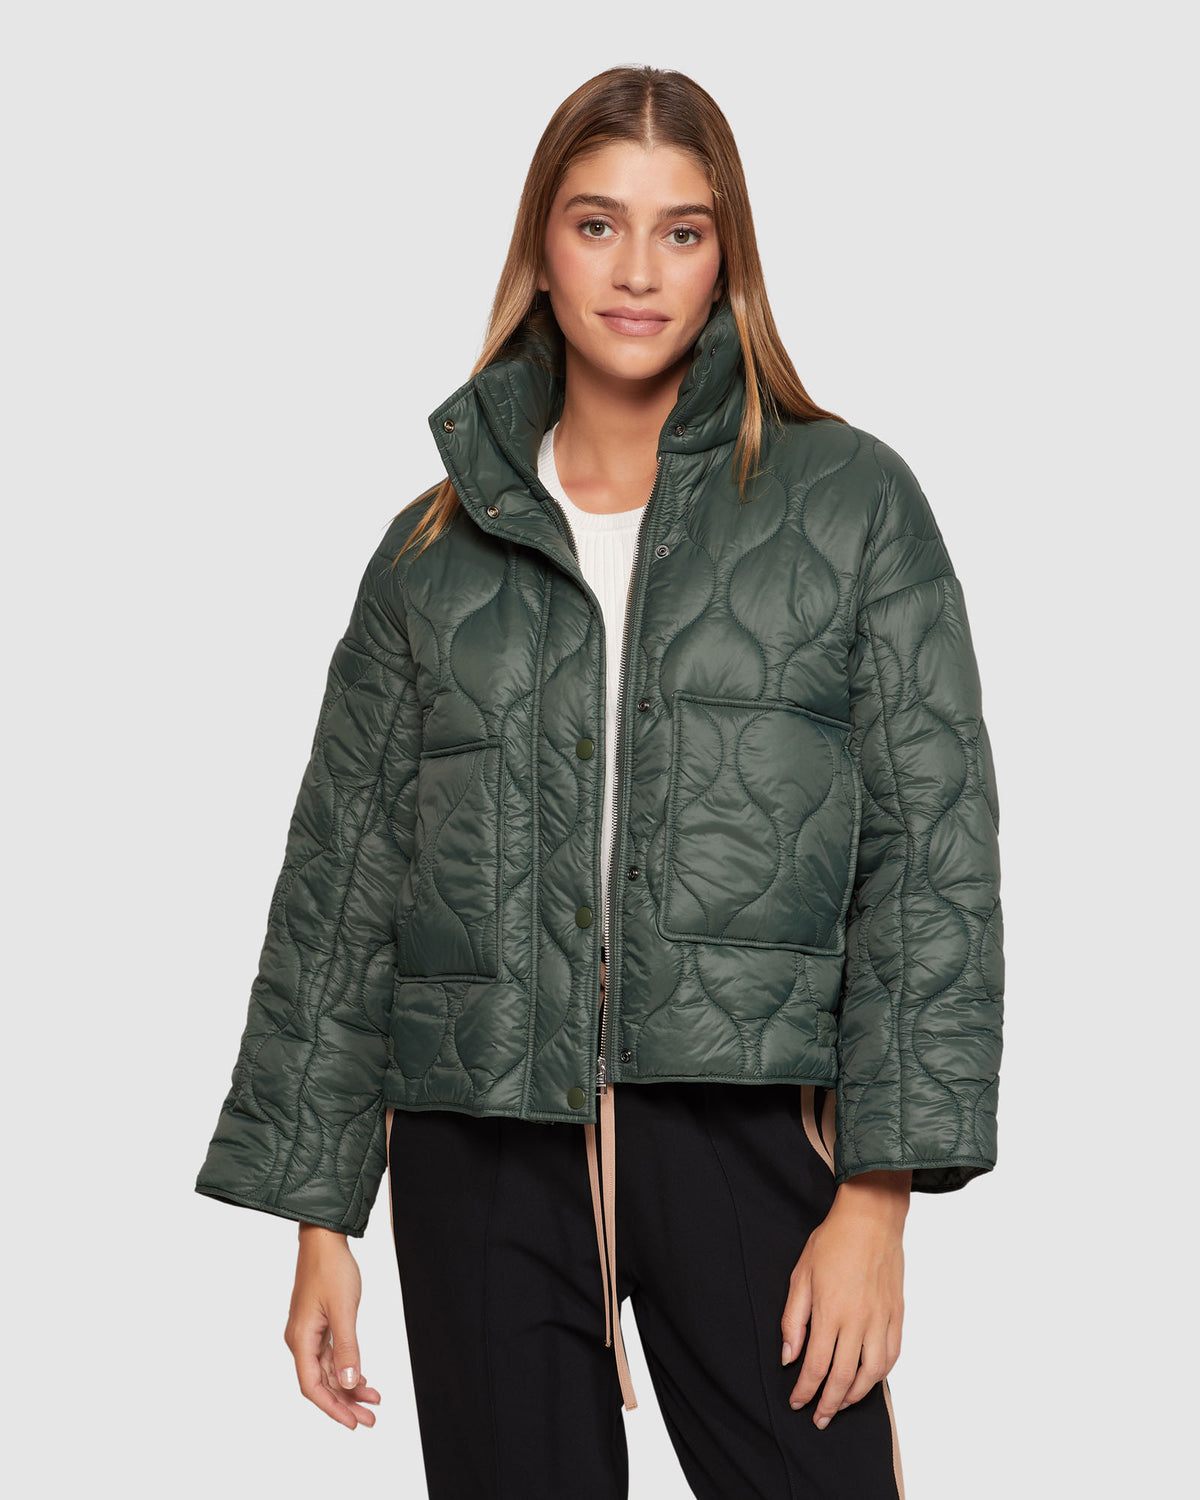 Fazortev Womens Oversized Puffer Jacket Quilted Dolman Hoodies Pullover  Long Sleeve Lightweight Warm Tops Coat : Clothing, Shoes & Jewelry -  Amazon.com